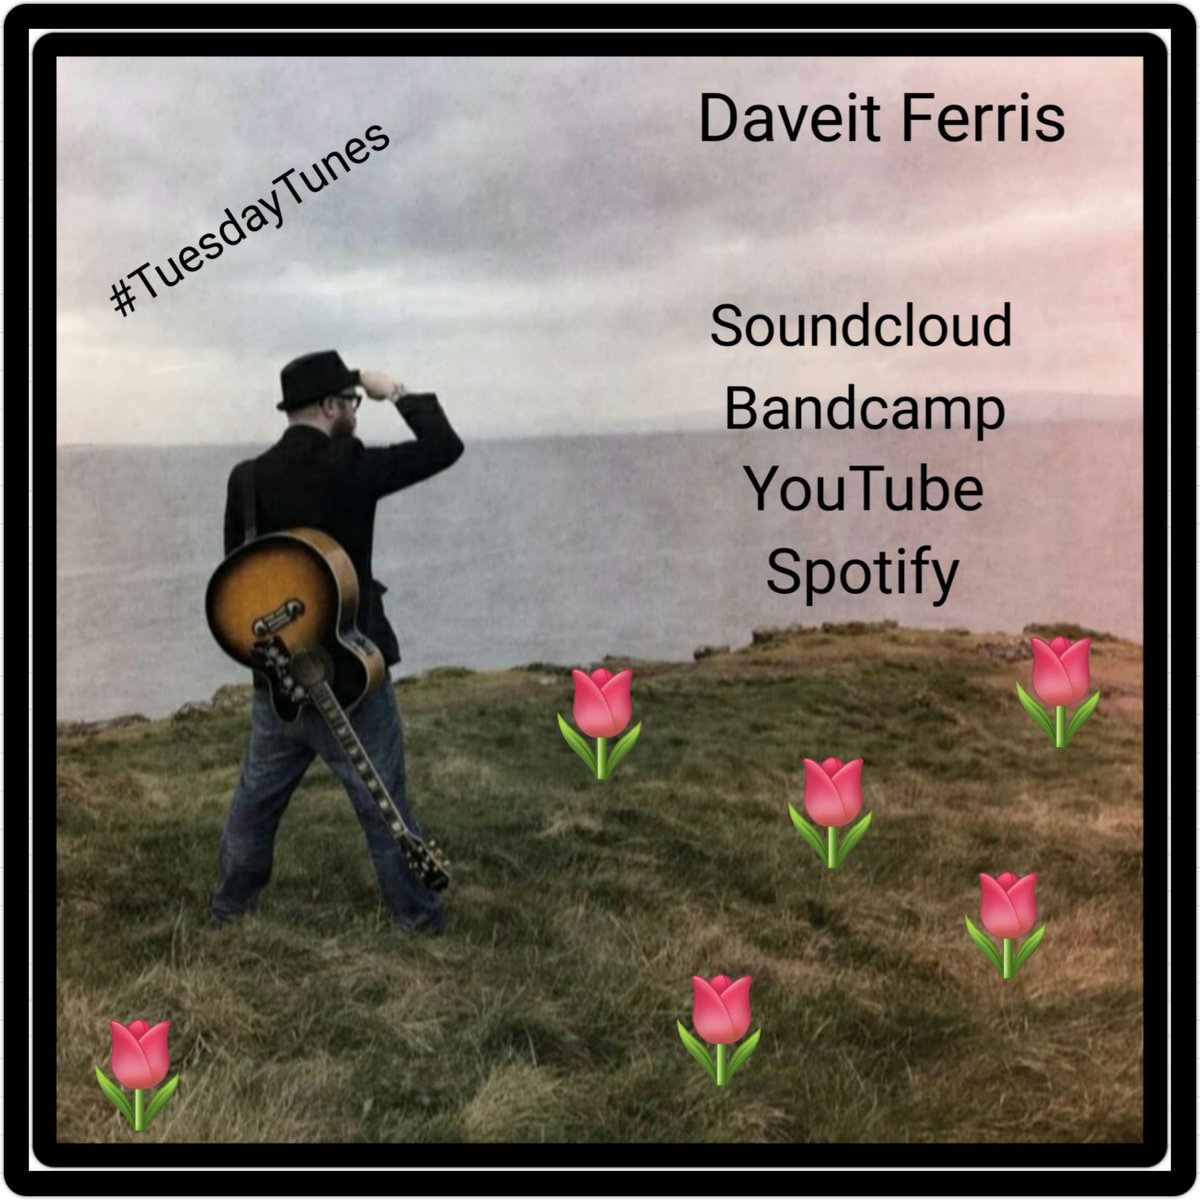 Your search for brilliant music just ended! Listen to #DaveitFerris and get the BEST #TuesdayTunes you've ever had in your ears. You can thank me later! #SupportArtists 

soundcloud.com/daveitferris

daveitferris.bandcamp.com 

youtube.com/channel/UCpKbj…

open.spotify.com/artist/2xXLh8k…